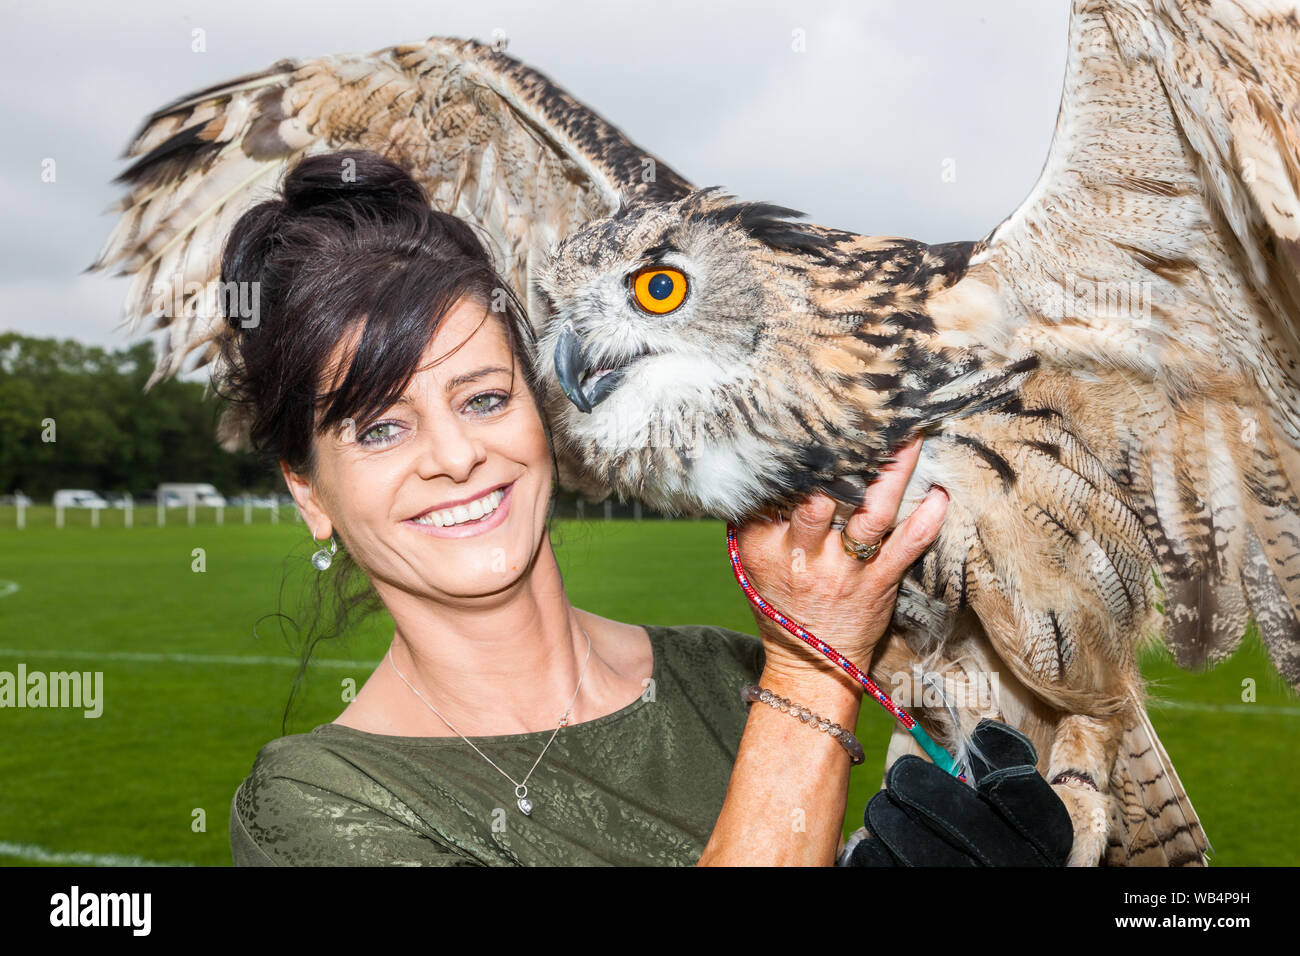 Ballygarvan, Cork, Ireland. 24th August, 2019. Jolanta Proc from Riverstick, with her Eagle Owl Fifi at the agricultural show that was held at Ballygarvan, Co. Cork, Ireland.- Credit; David Creedon / Alamy Live News Stock Photo